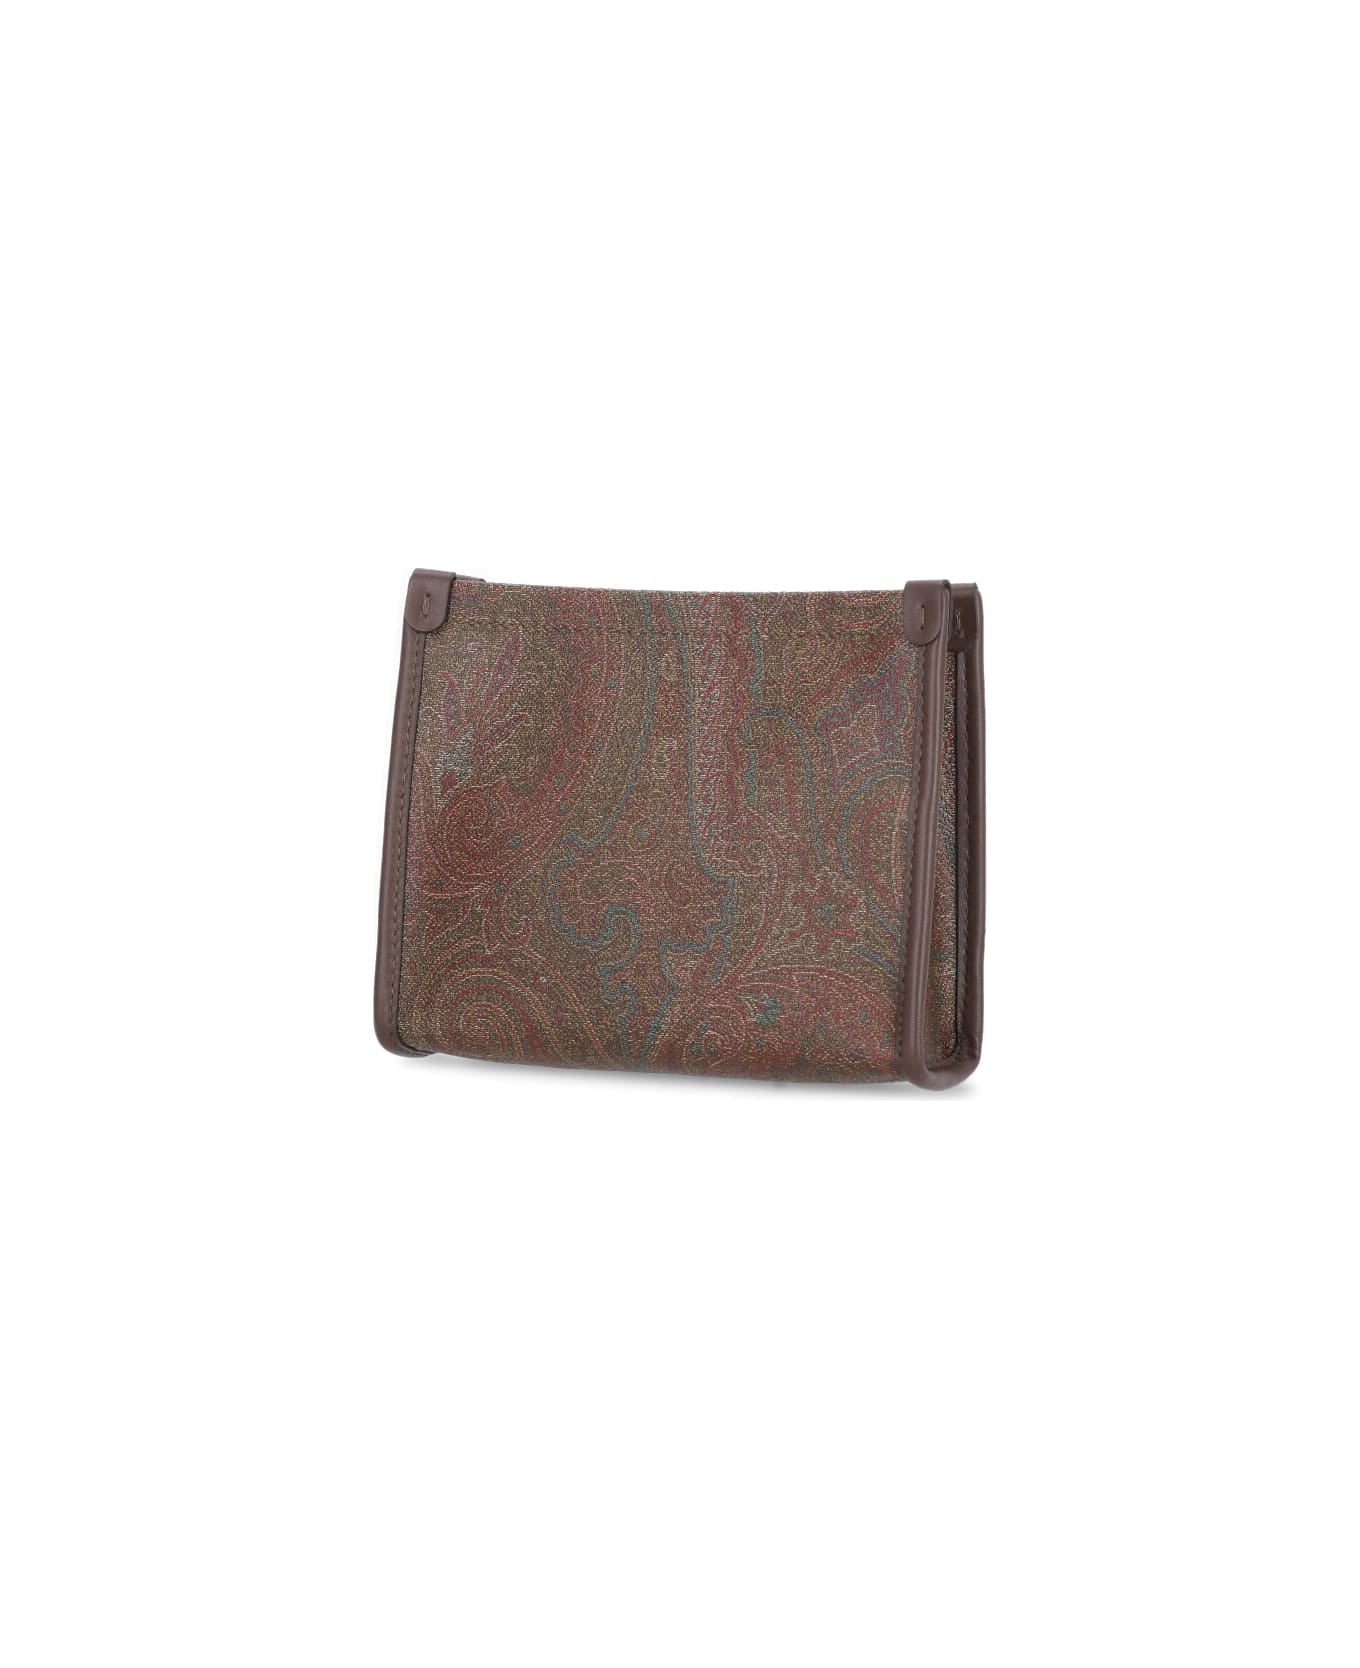 Etro Paisley Clutch Bag In Coated Canvas With Logo - Brown